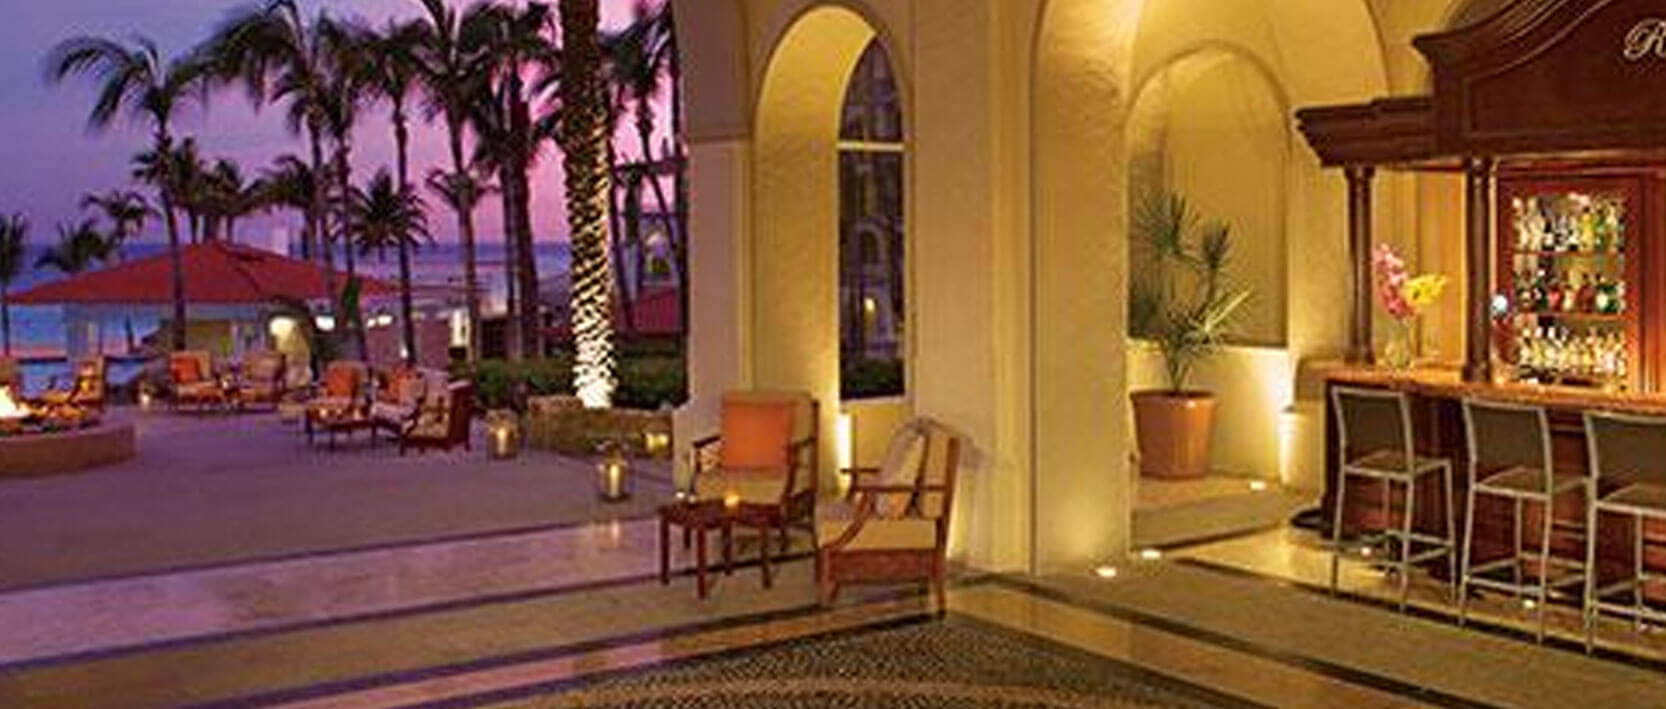 Dreams Los Cabos Suites Restaurants and Bars - The Rendezvous